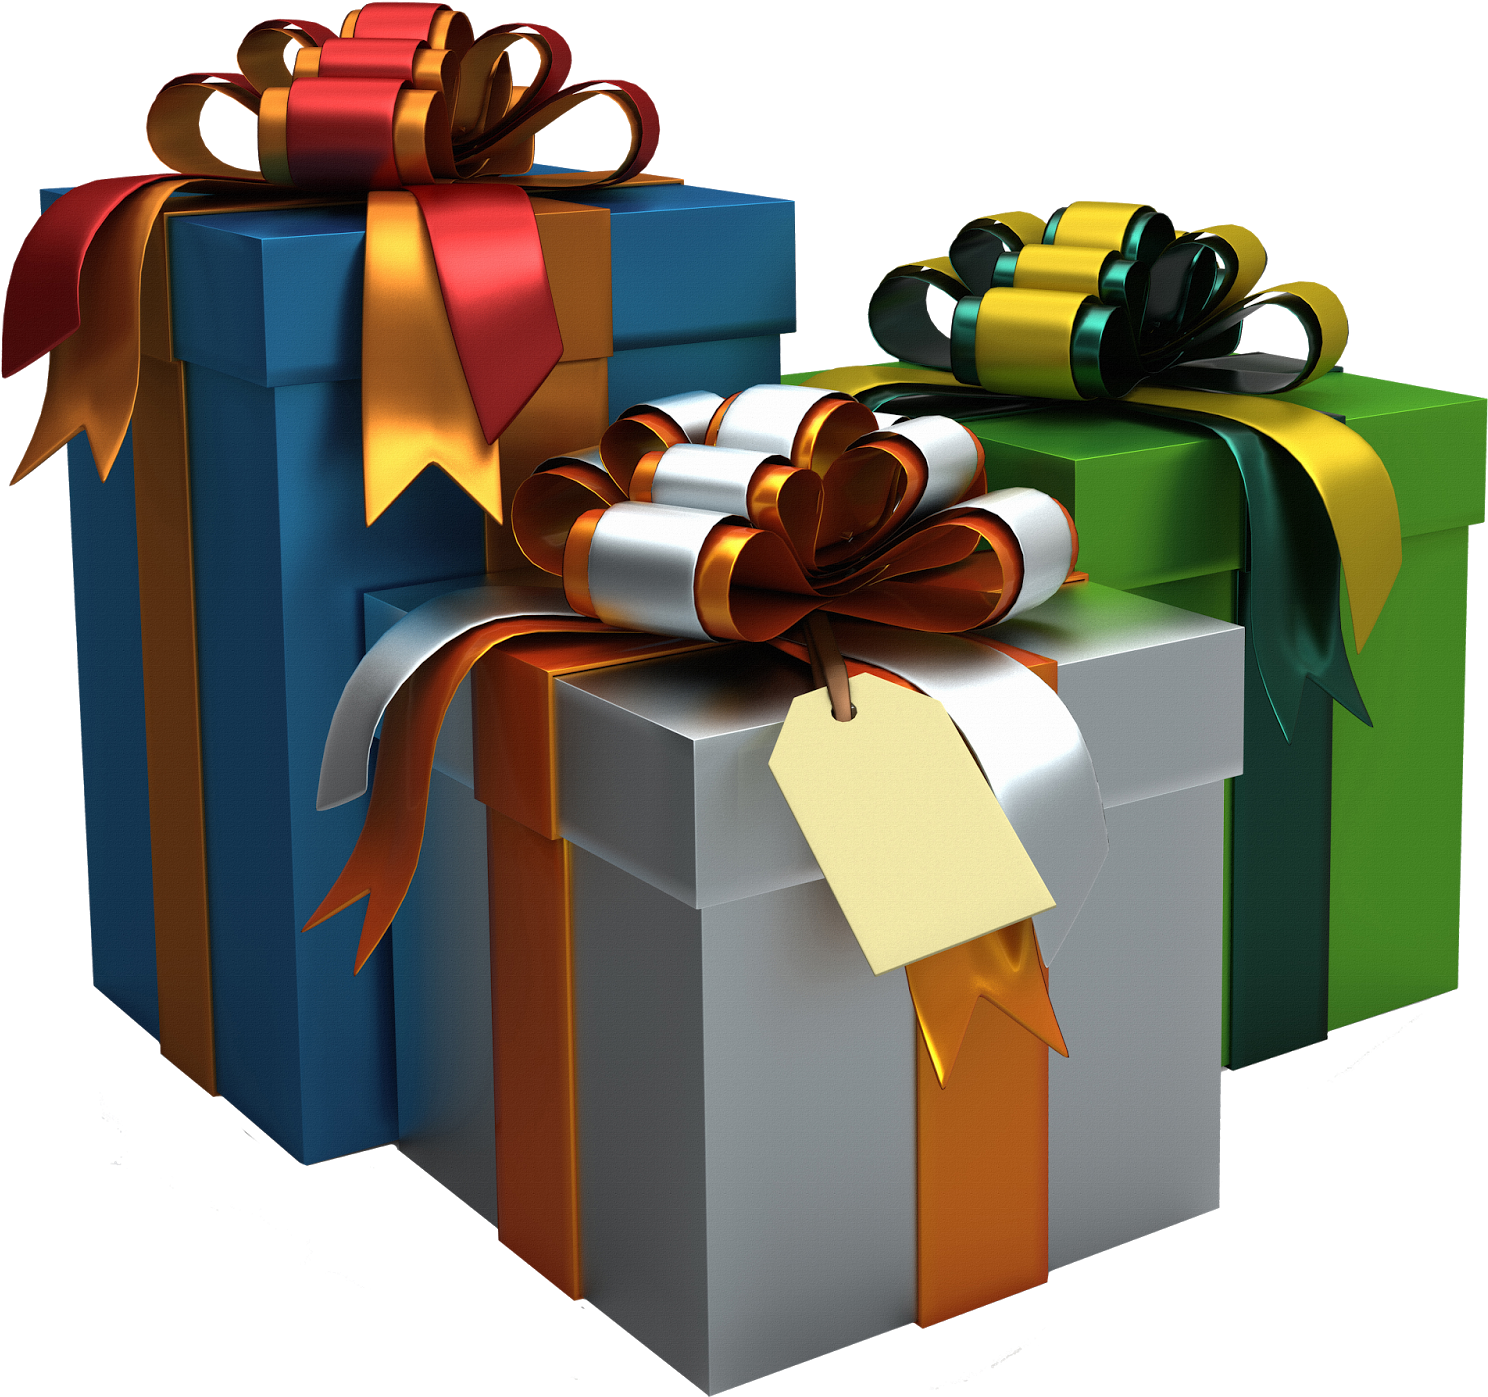 Download 3 Gifts PNG Image with No Background 